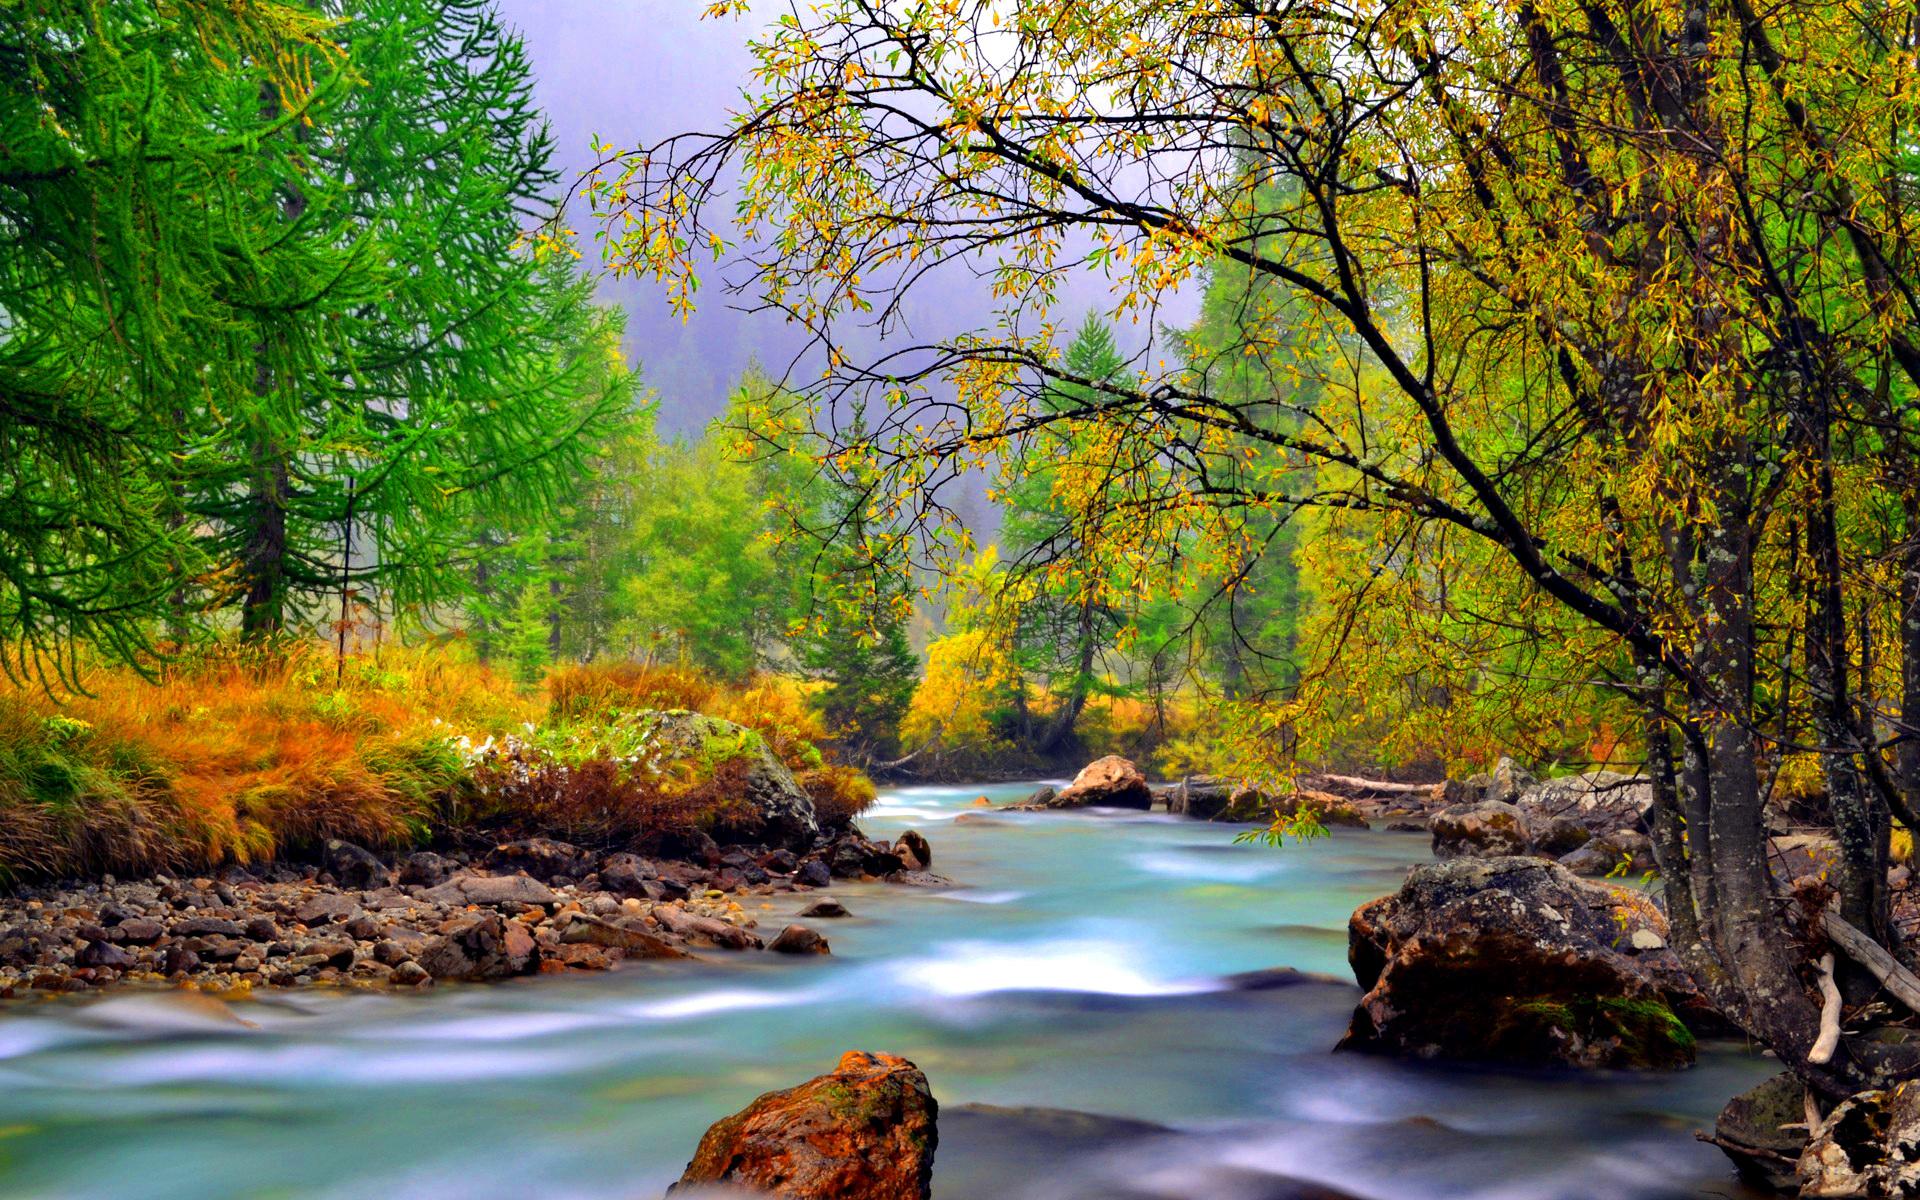 Mountain River With Rocks Rocks Yellowed Grass Evergreen And Deciduous